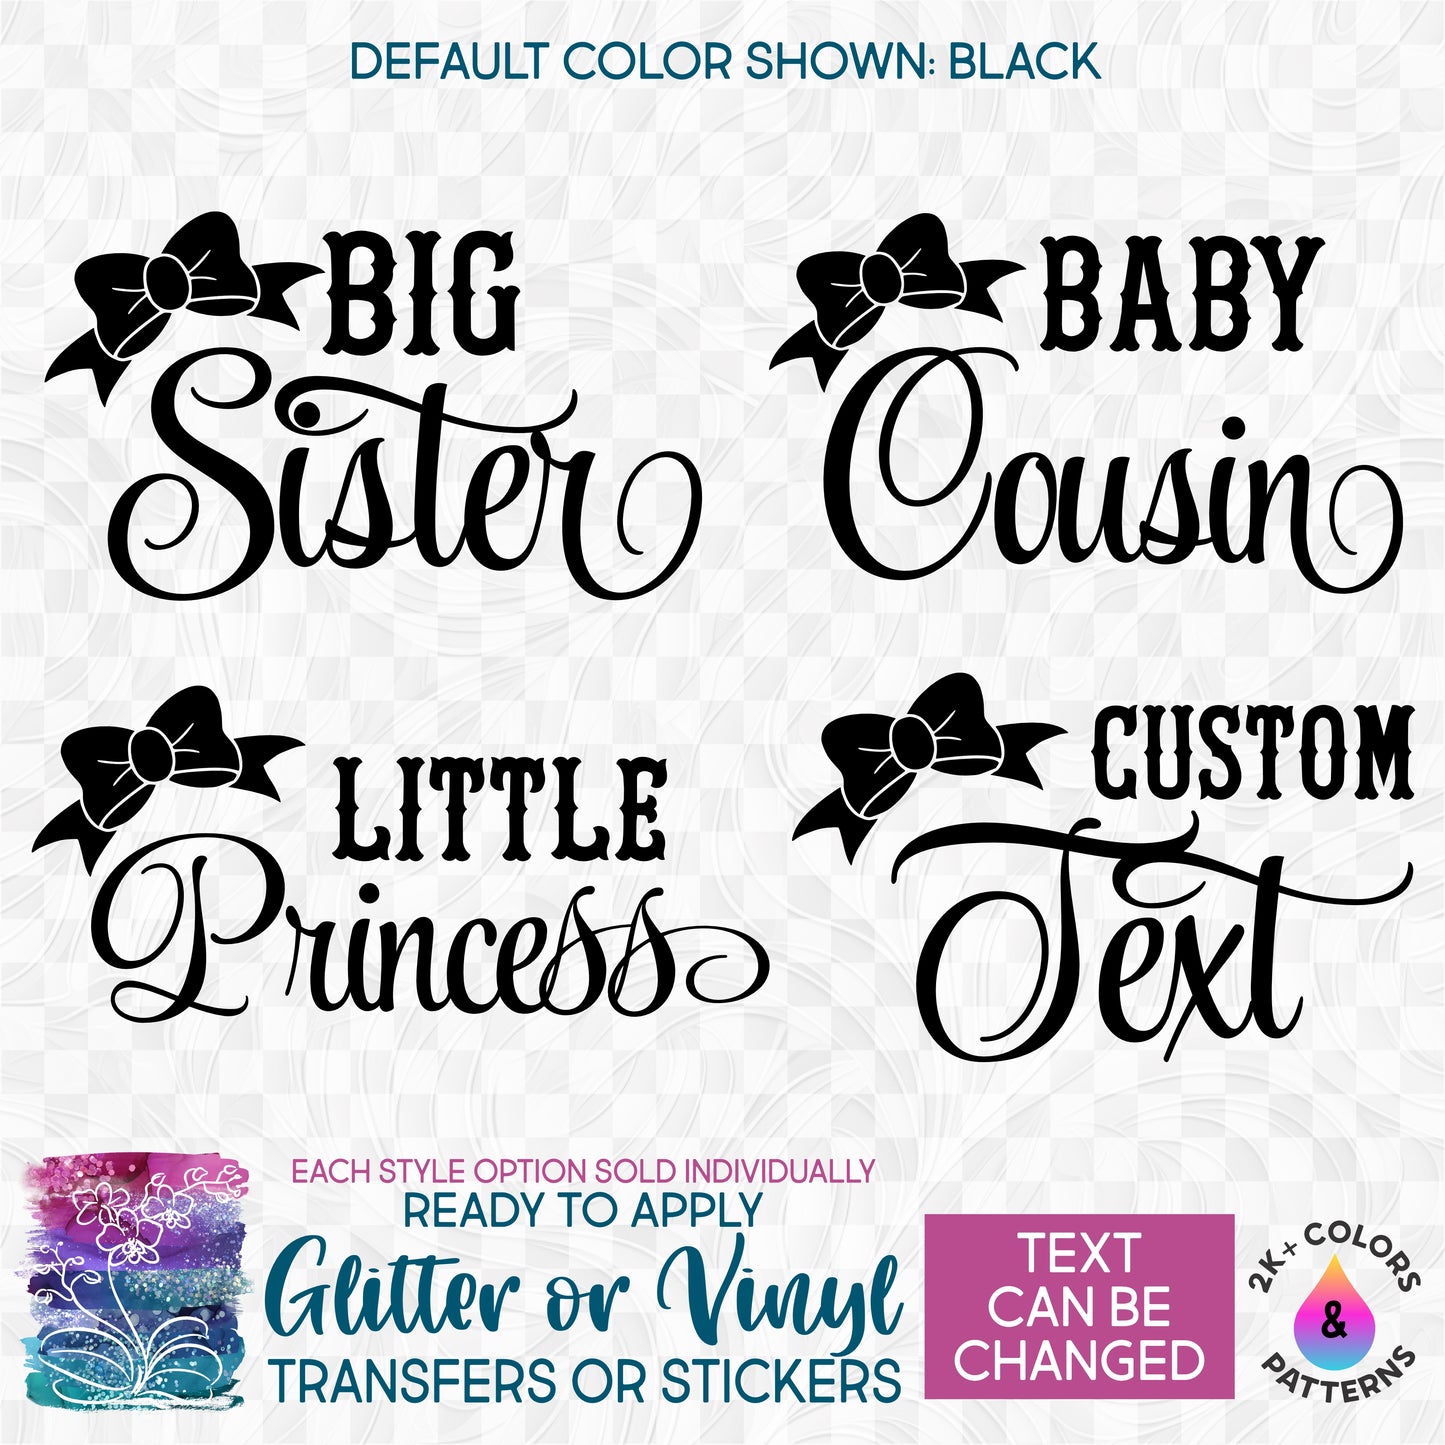 (s122-D3) Big, Little, Sister, Cousin, Princess Bow Glitter or Vinyl Iron-On Transfer or Sticker